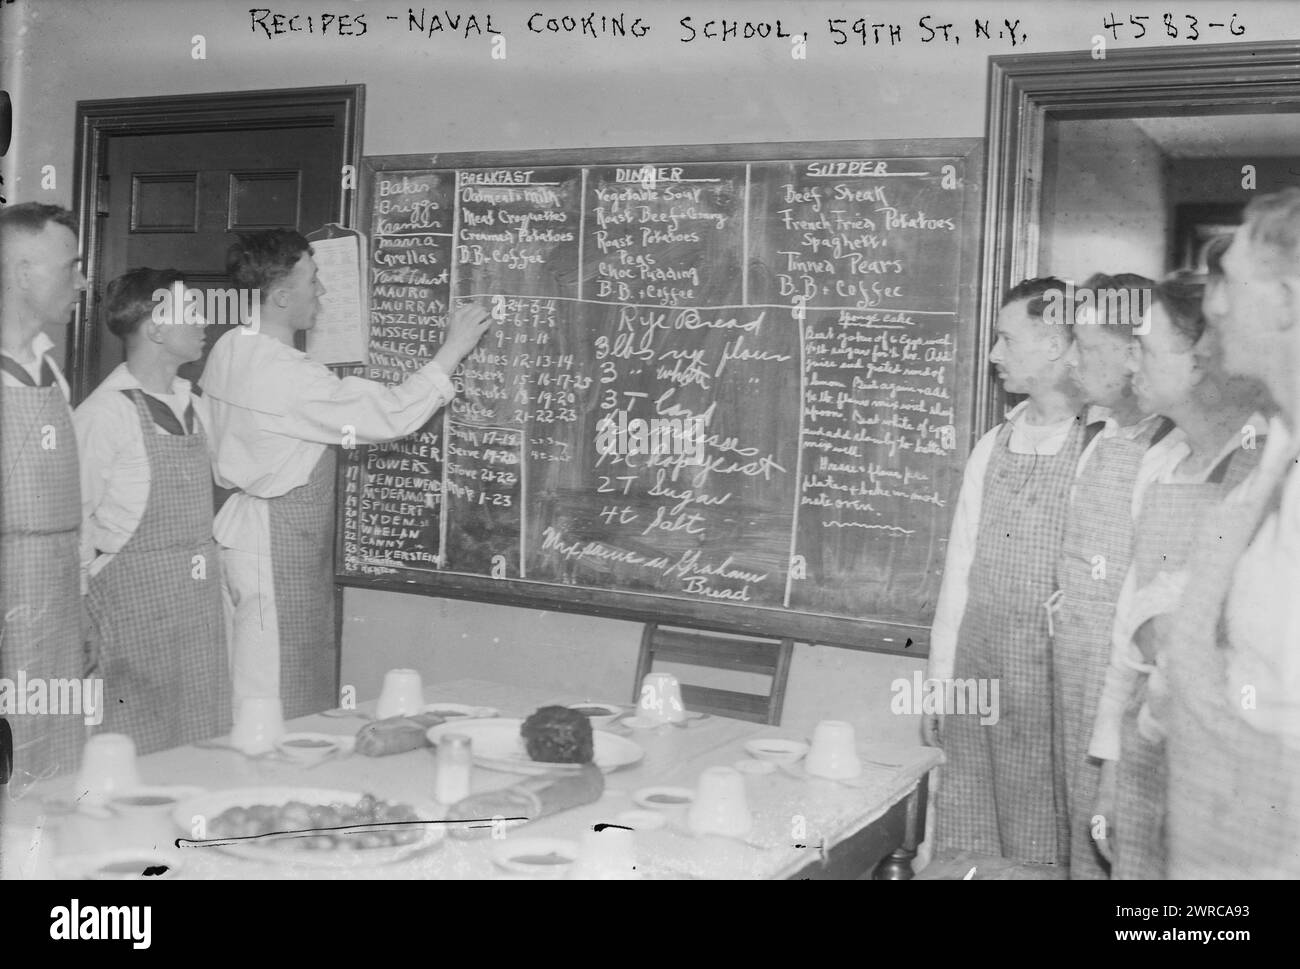 Recipes, Naval cooking school, 59th St. N.Y., Photograph shows students looking at a blackboard on which are written recipes for rye bread and other foods, at the New York Cooking School, 126 East 59th Street, which trained soldiers to cook for the Navy during World War I., between ca. 1915 and 1918, World War, 1914-1918, Glass negatives, 1 negative: glass Stock Photo